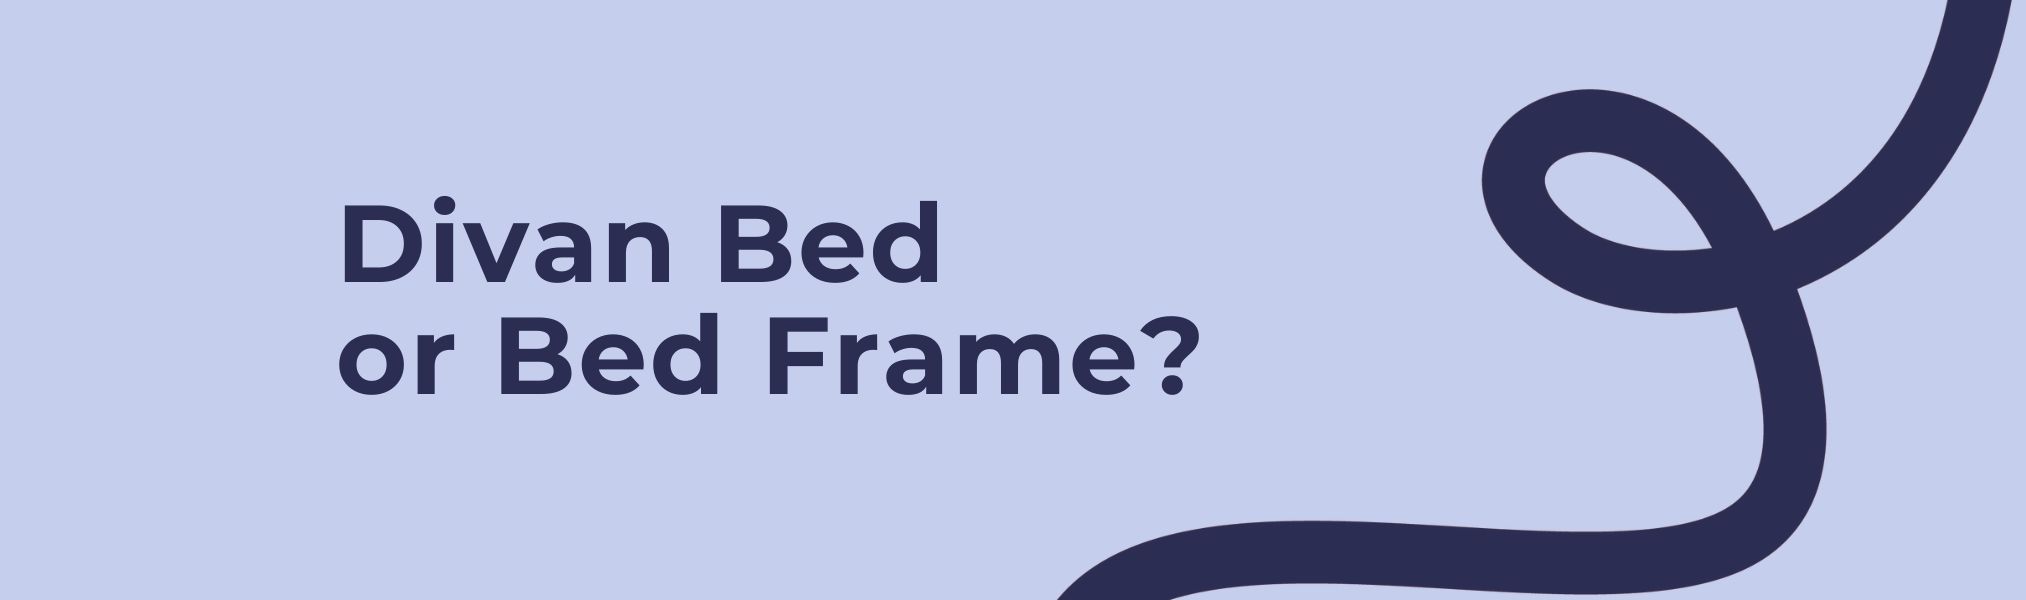 Which Bed is Best: A Divan Bed or a Bed Frame?